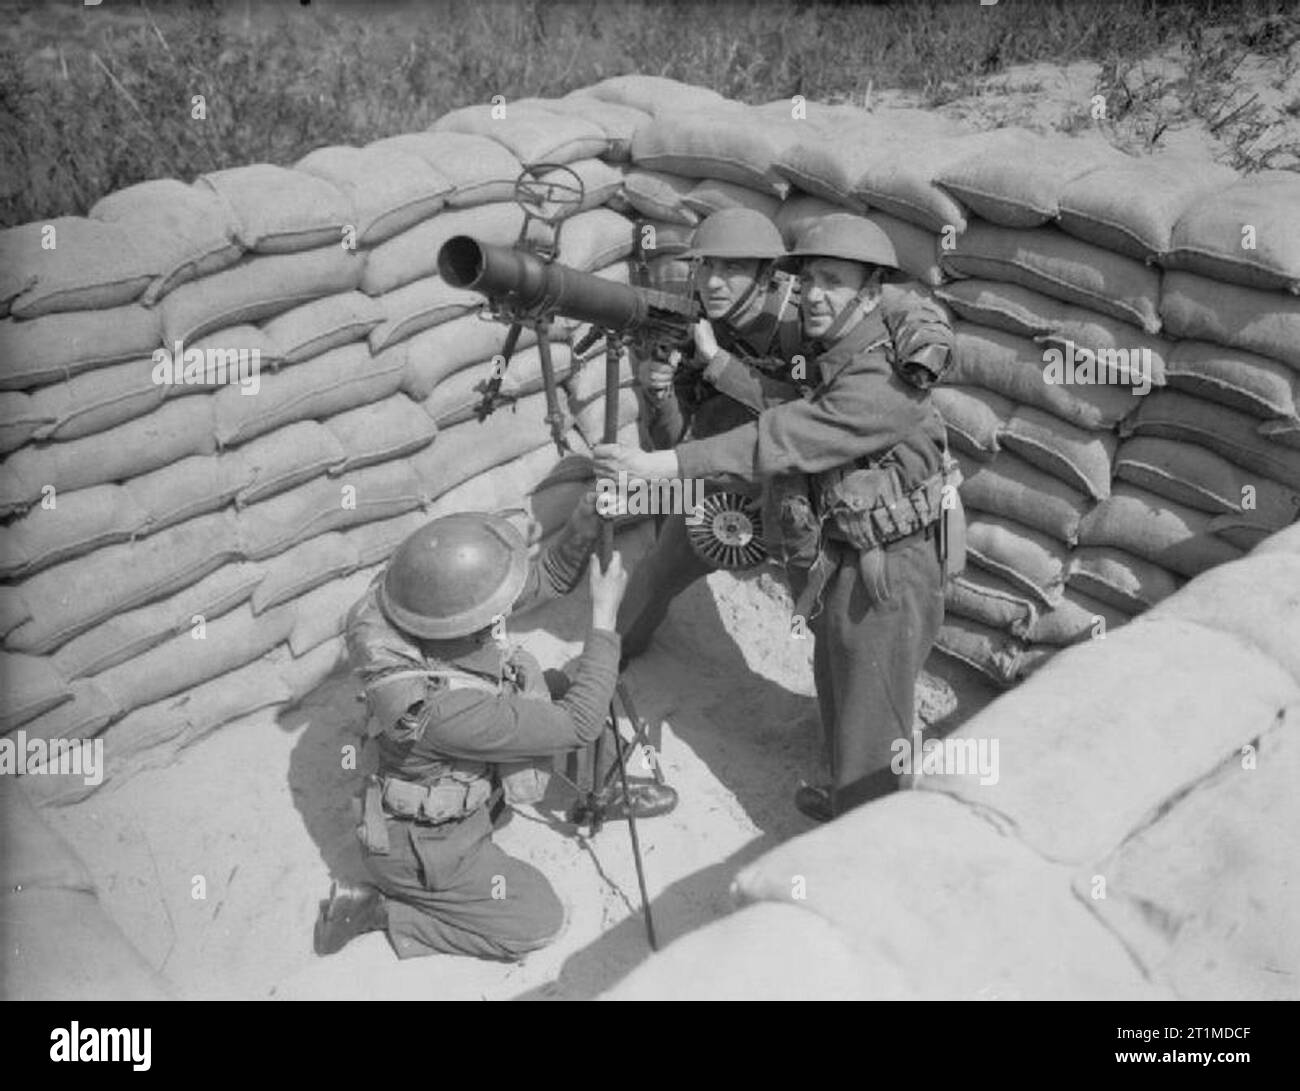 The British Army in the United Kingdom 1939-45 Gunners of 177 Heavy Battery, Royal Artillery, man an anti-aircraft Lewis gun at Fort Crosby near Liverpool, England, 1 August 1940. This operation formed part of British preparations to repel the threatened German invasion of 1940. Stock Photo